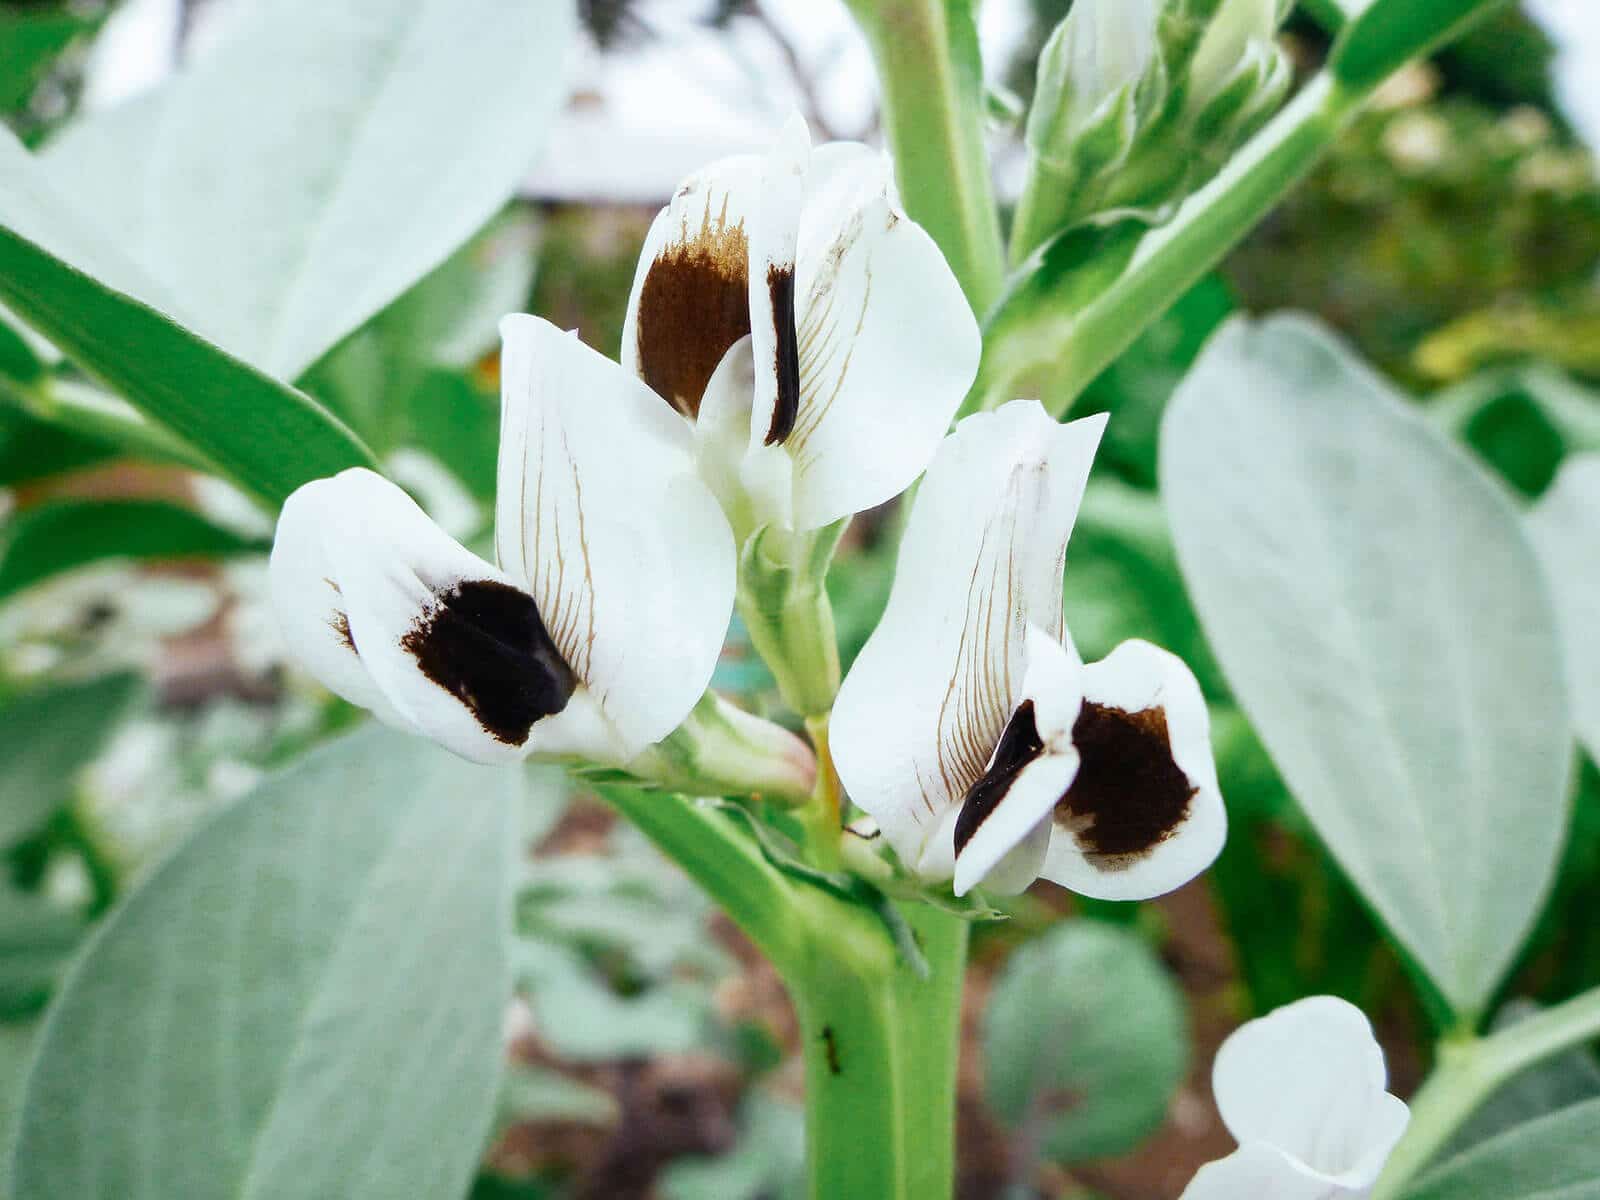 Close-up of broad bean flowers on a stem